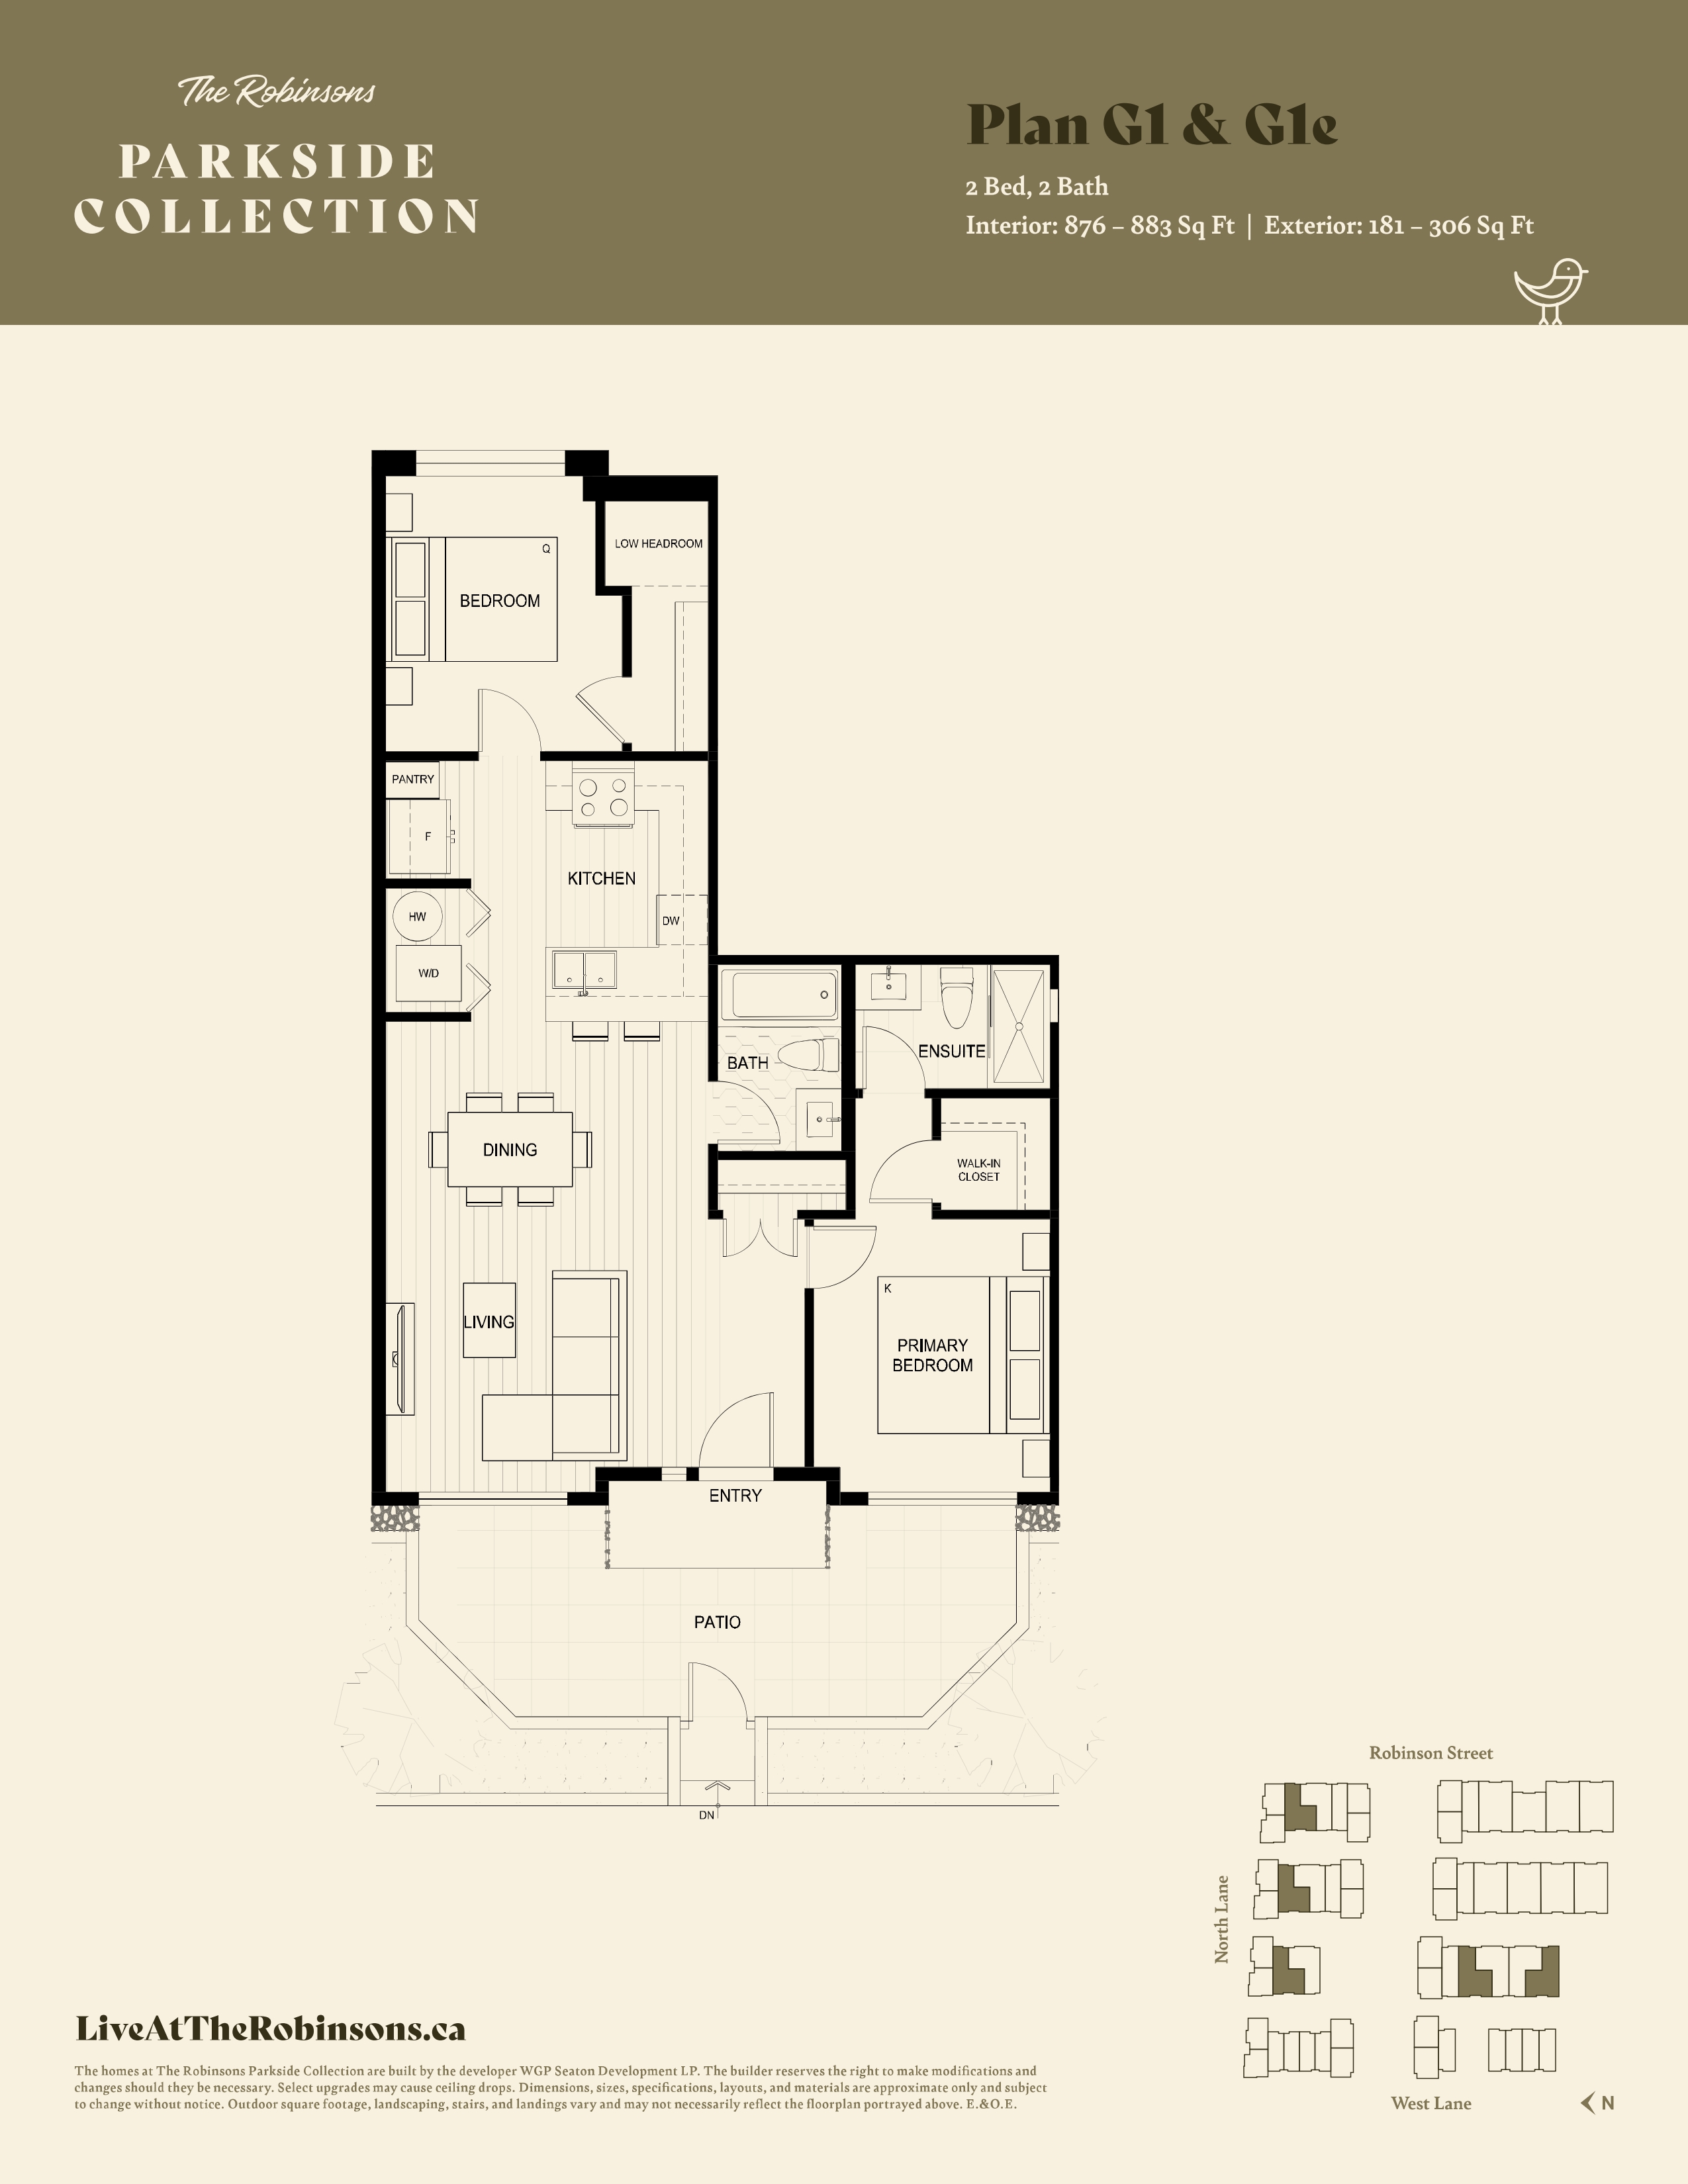  Floor Plan of The Robinsons Parkside Collection with undefined beds